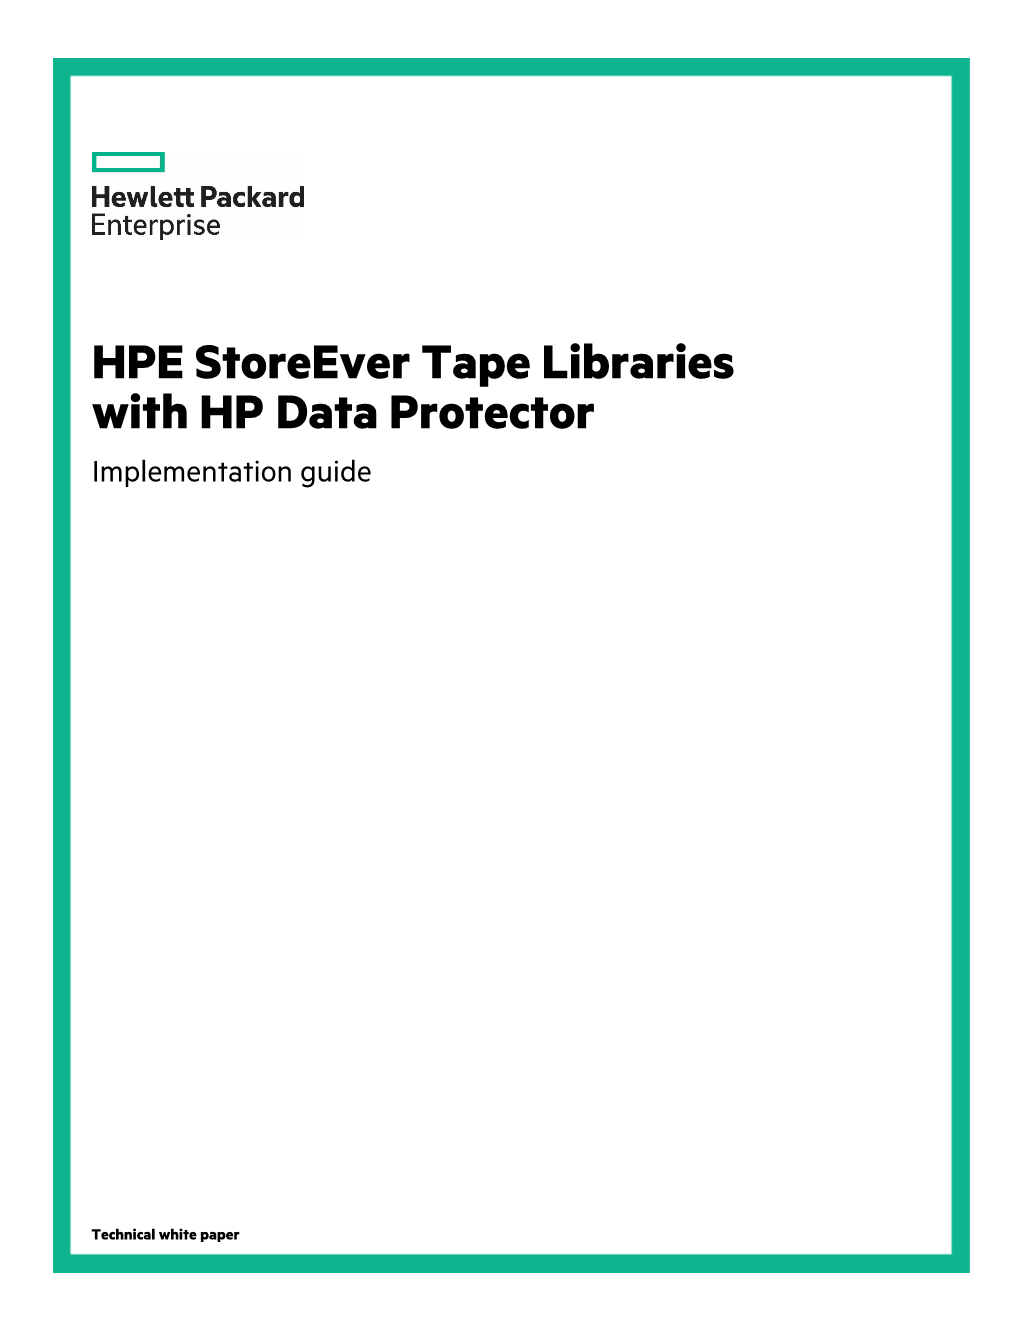 HPE Storeever Tape Libraries with HP Data Protector Technical White Paper